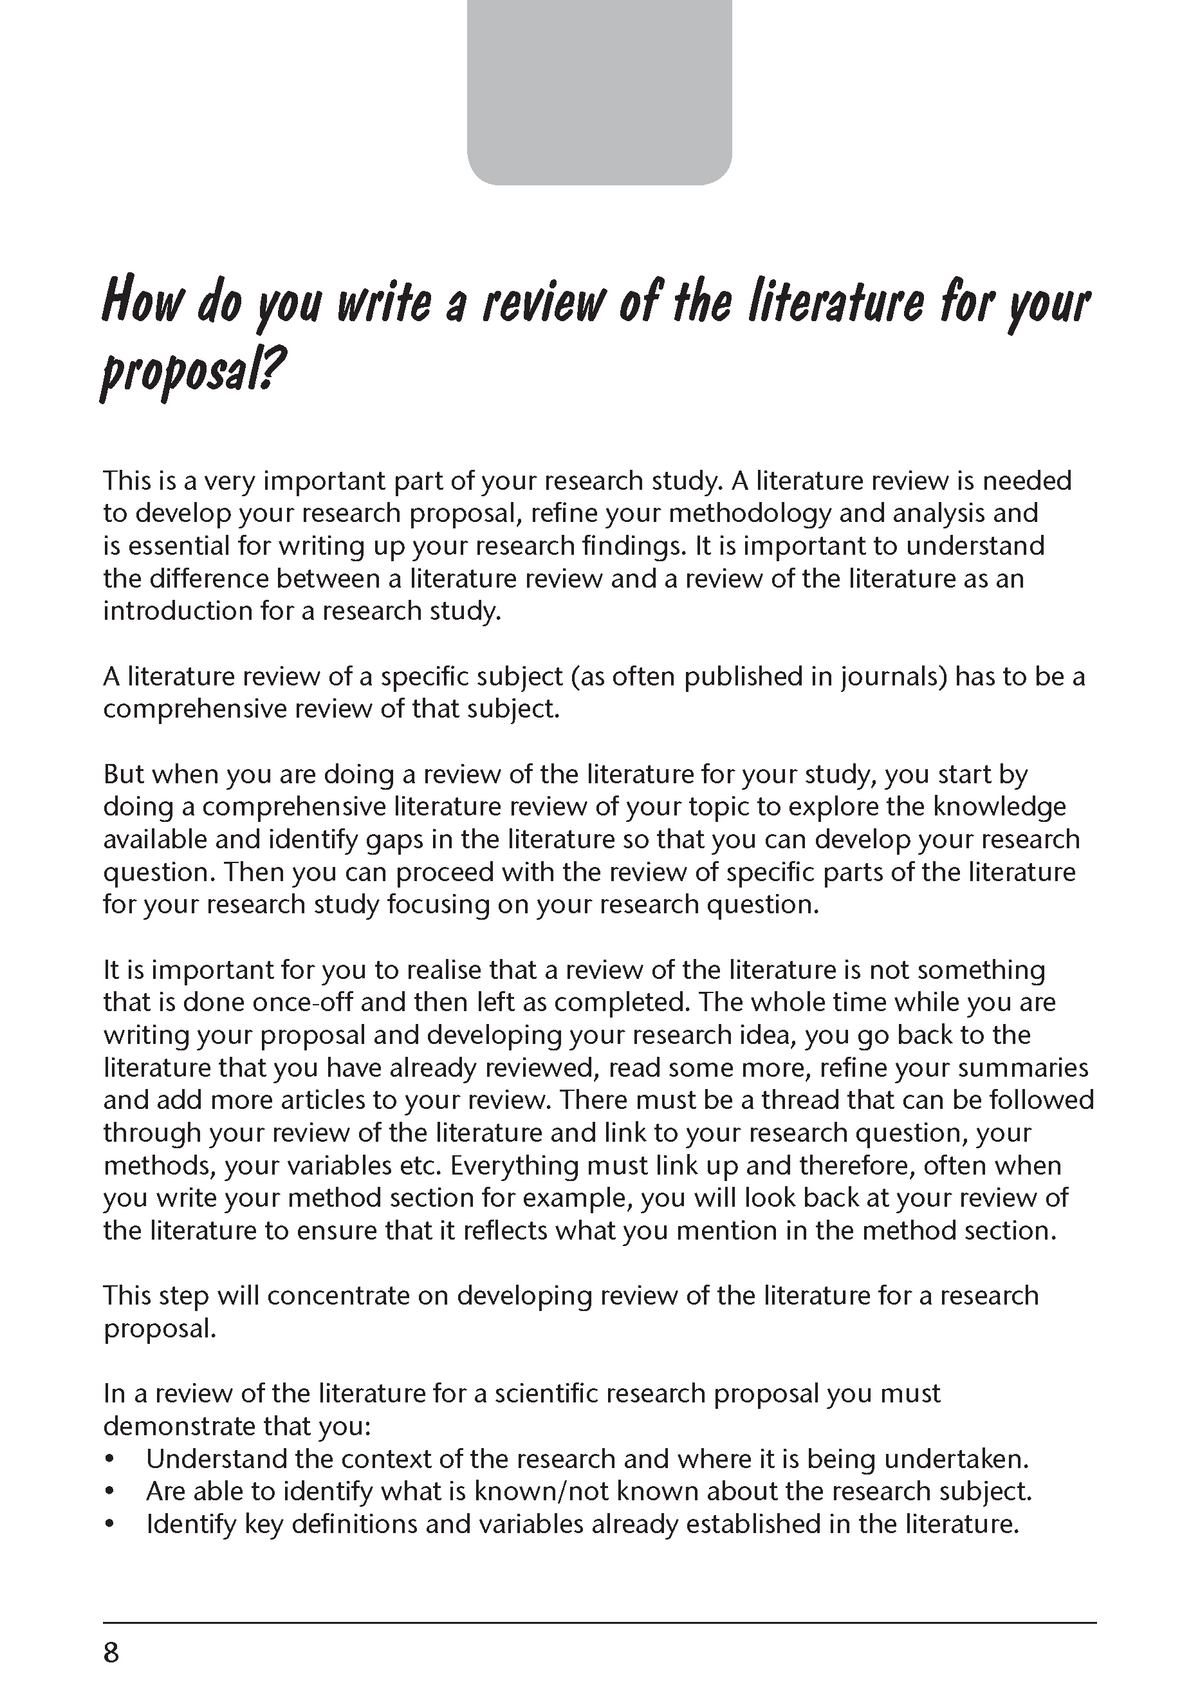 how to write a literature review for proposal